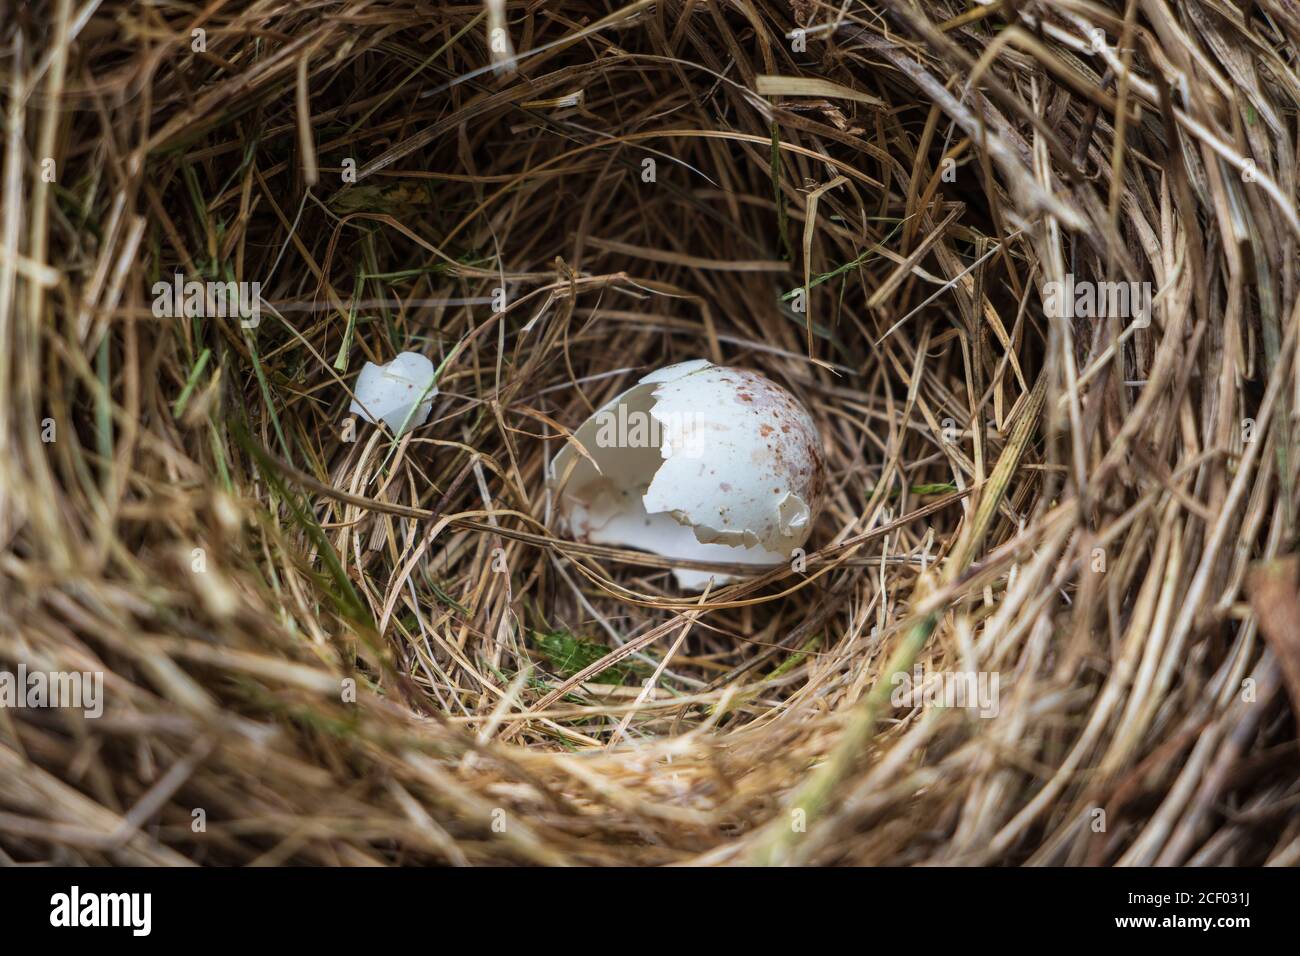 Remnants of a dark eyed junco egg left in the nest Stock Photo